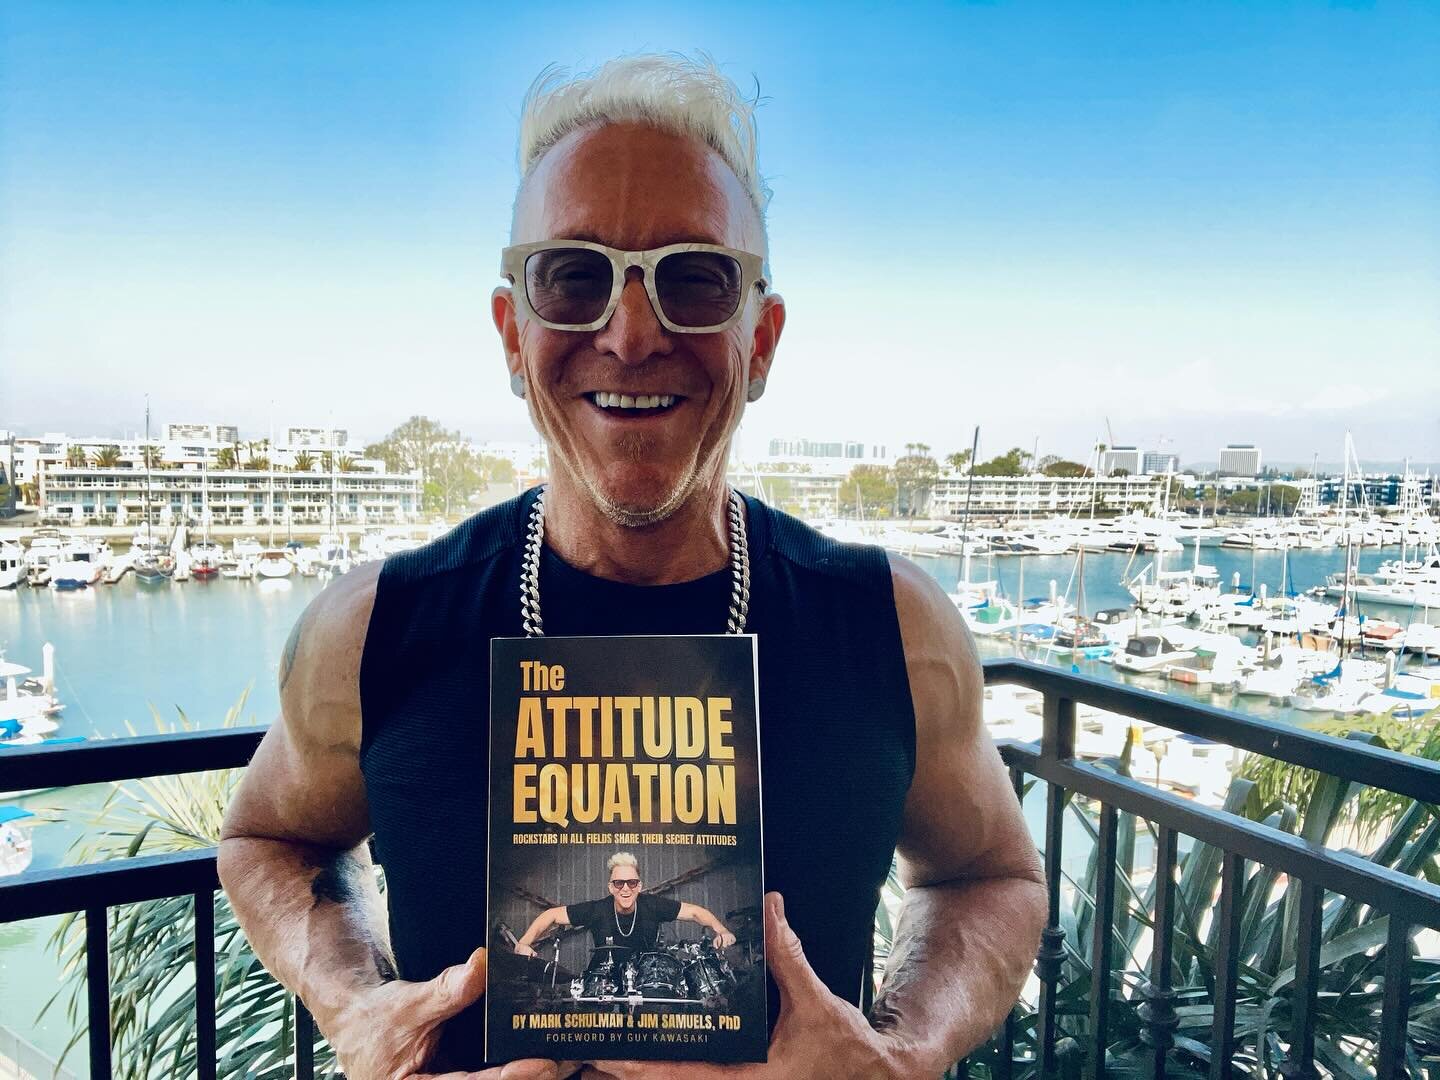 It's here!  This is the first advanced copy of #TheAttitudeEquation. I am so grateful that after a few years of working with my amazing co-writer, Dr. Jim Samuels and revelatory interviews with some of the top performers on the planet that our book i